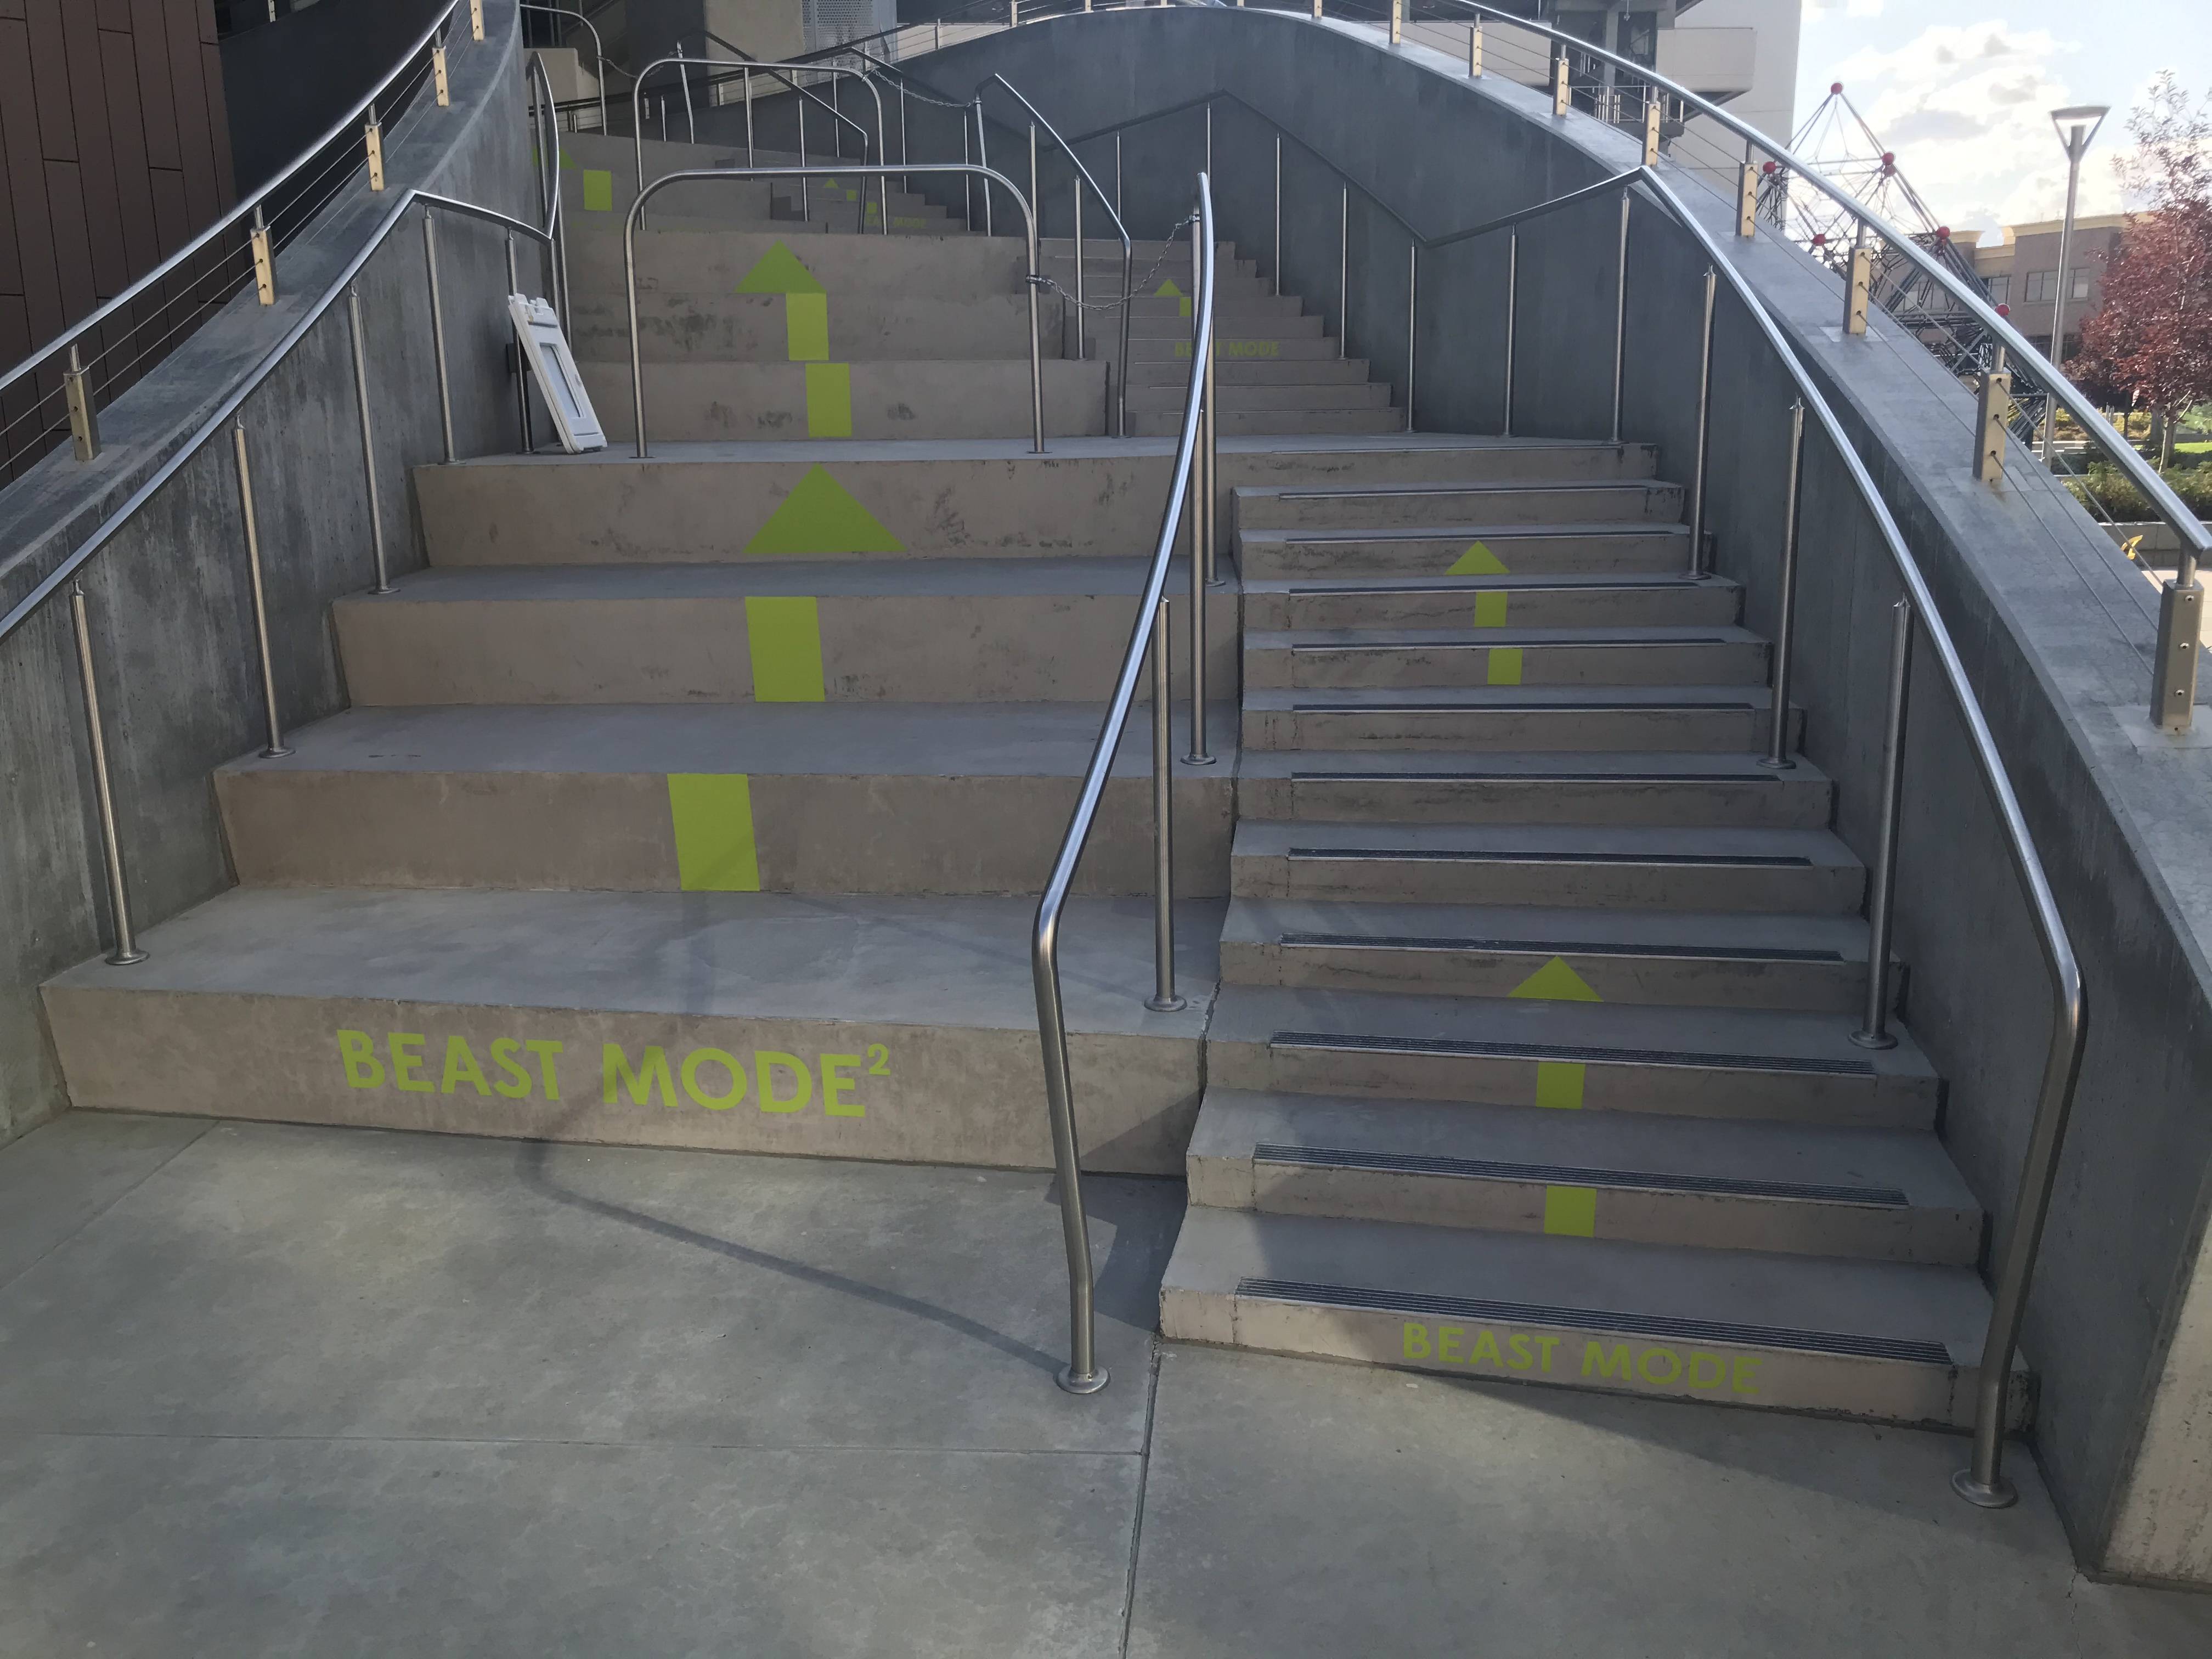 Stairs for advanced stepping.